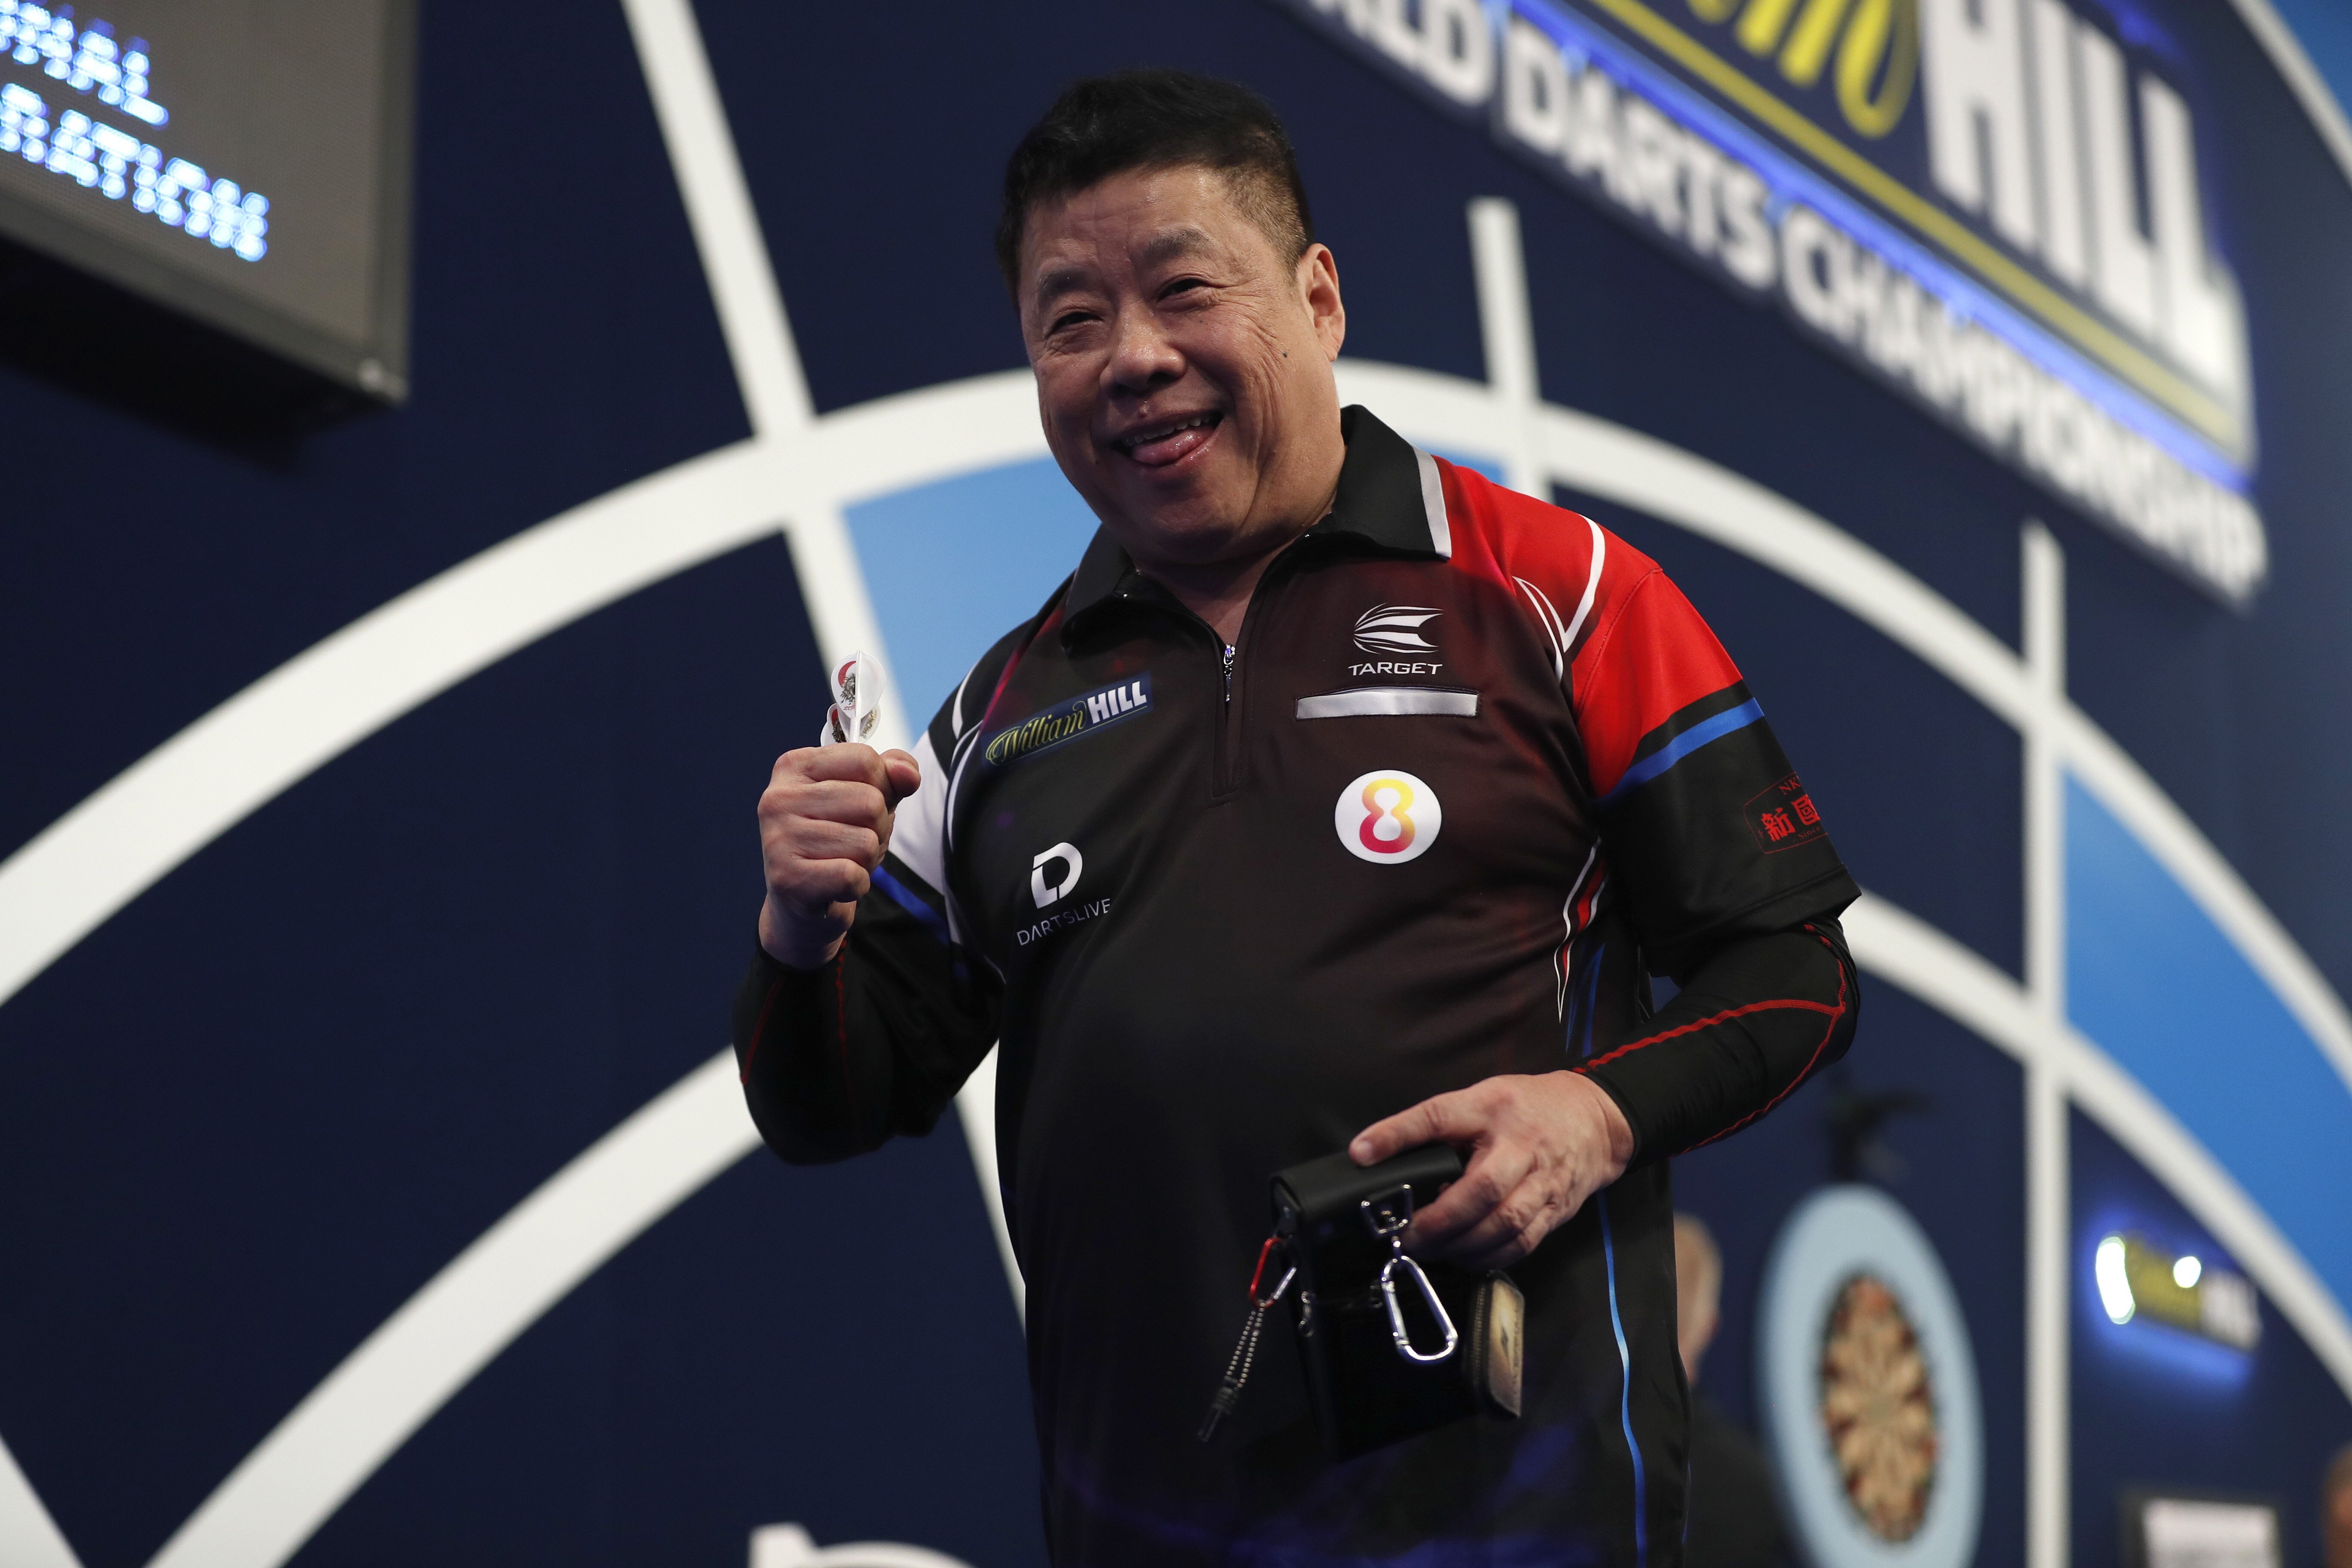 Paul Lim, of Singapore, reacts during his first-round match against England’s Luke Humphries during day four of the PDC William Hill World Darts Championship at Alexandra Palace. Photo: Getty Images